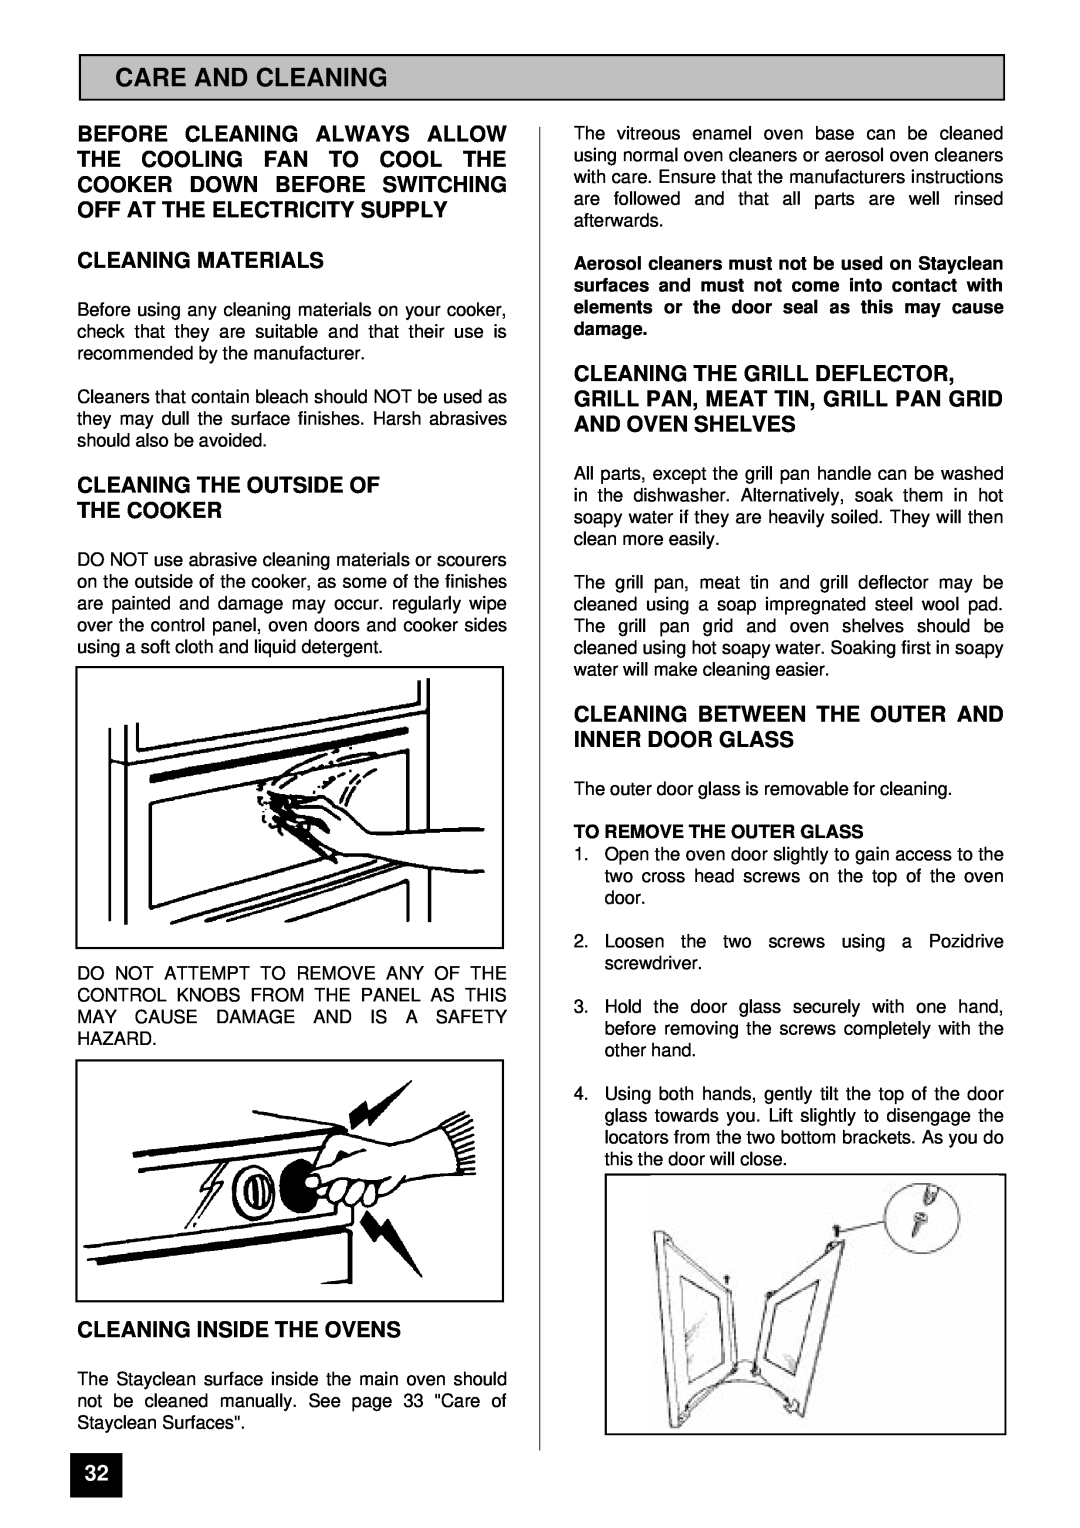 Tricity Bendix BD 913/2 installation instructions Care And Cleaning, Cleaning Materials, Cleaning The Outside Of The Cooker 